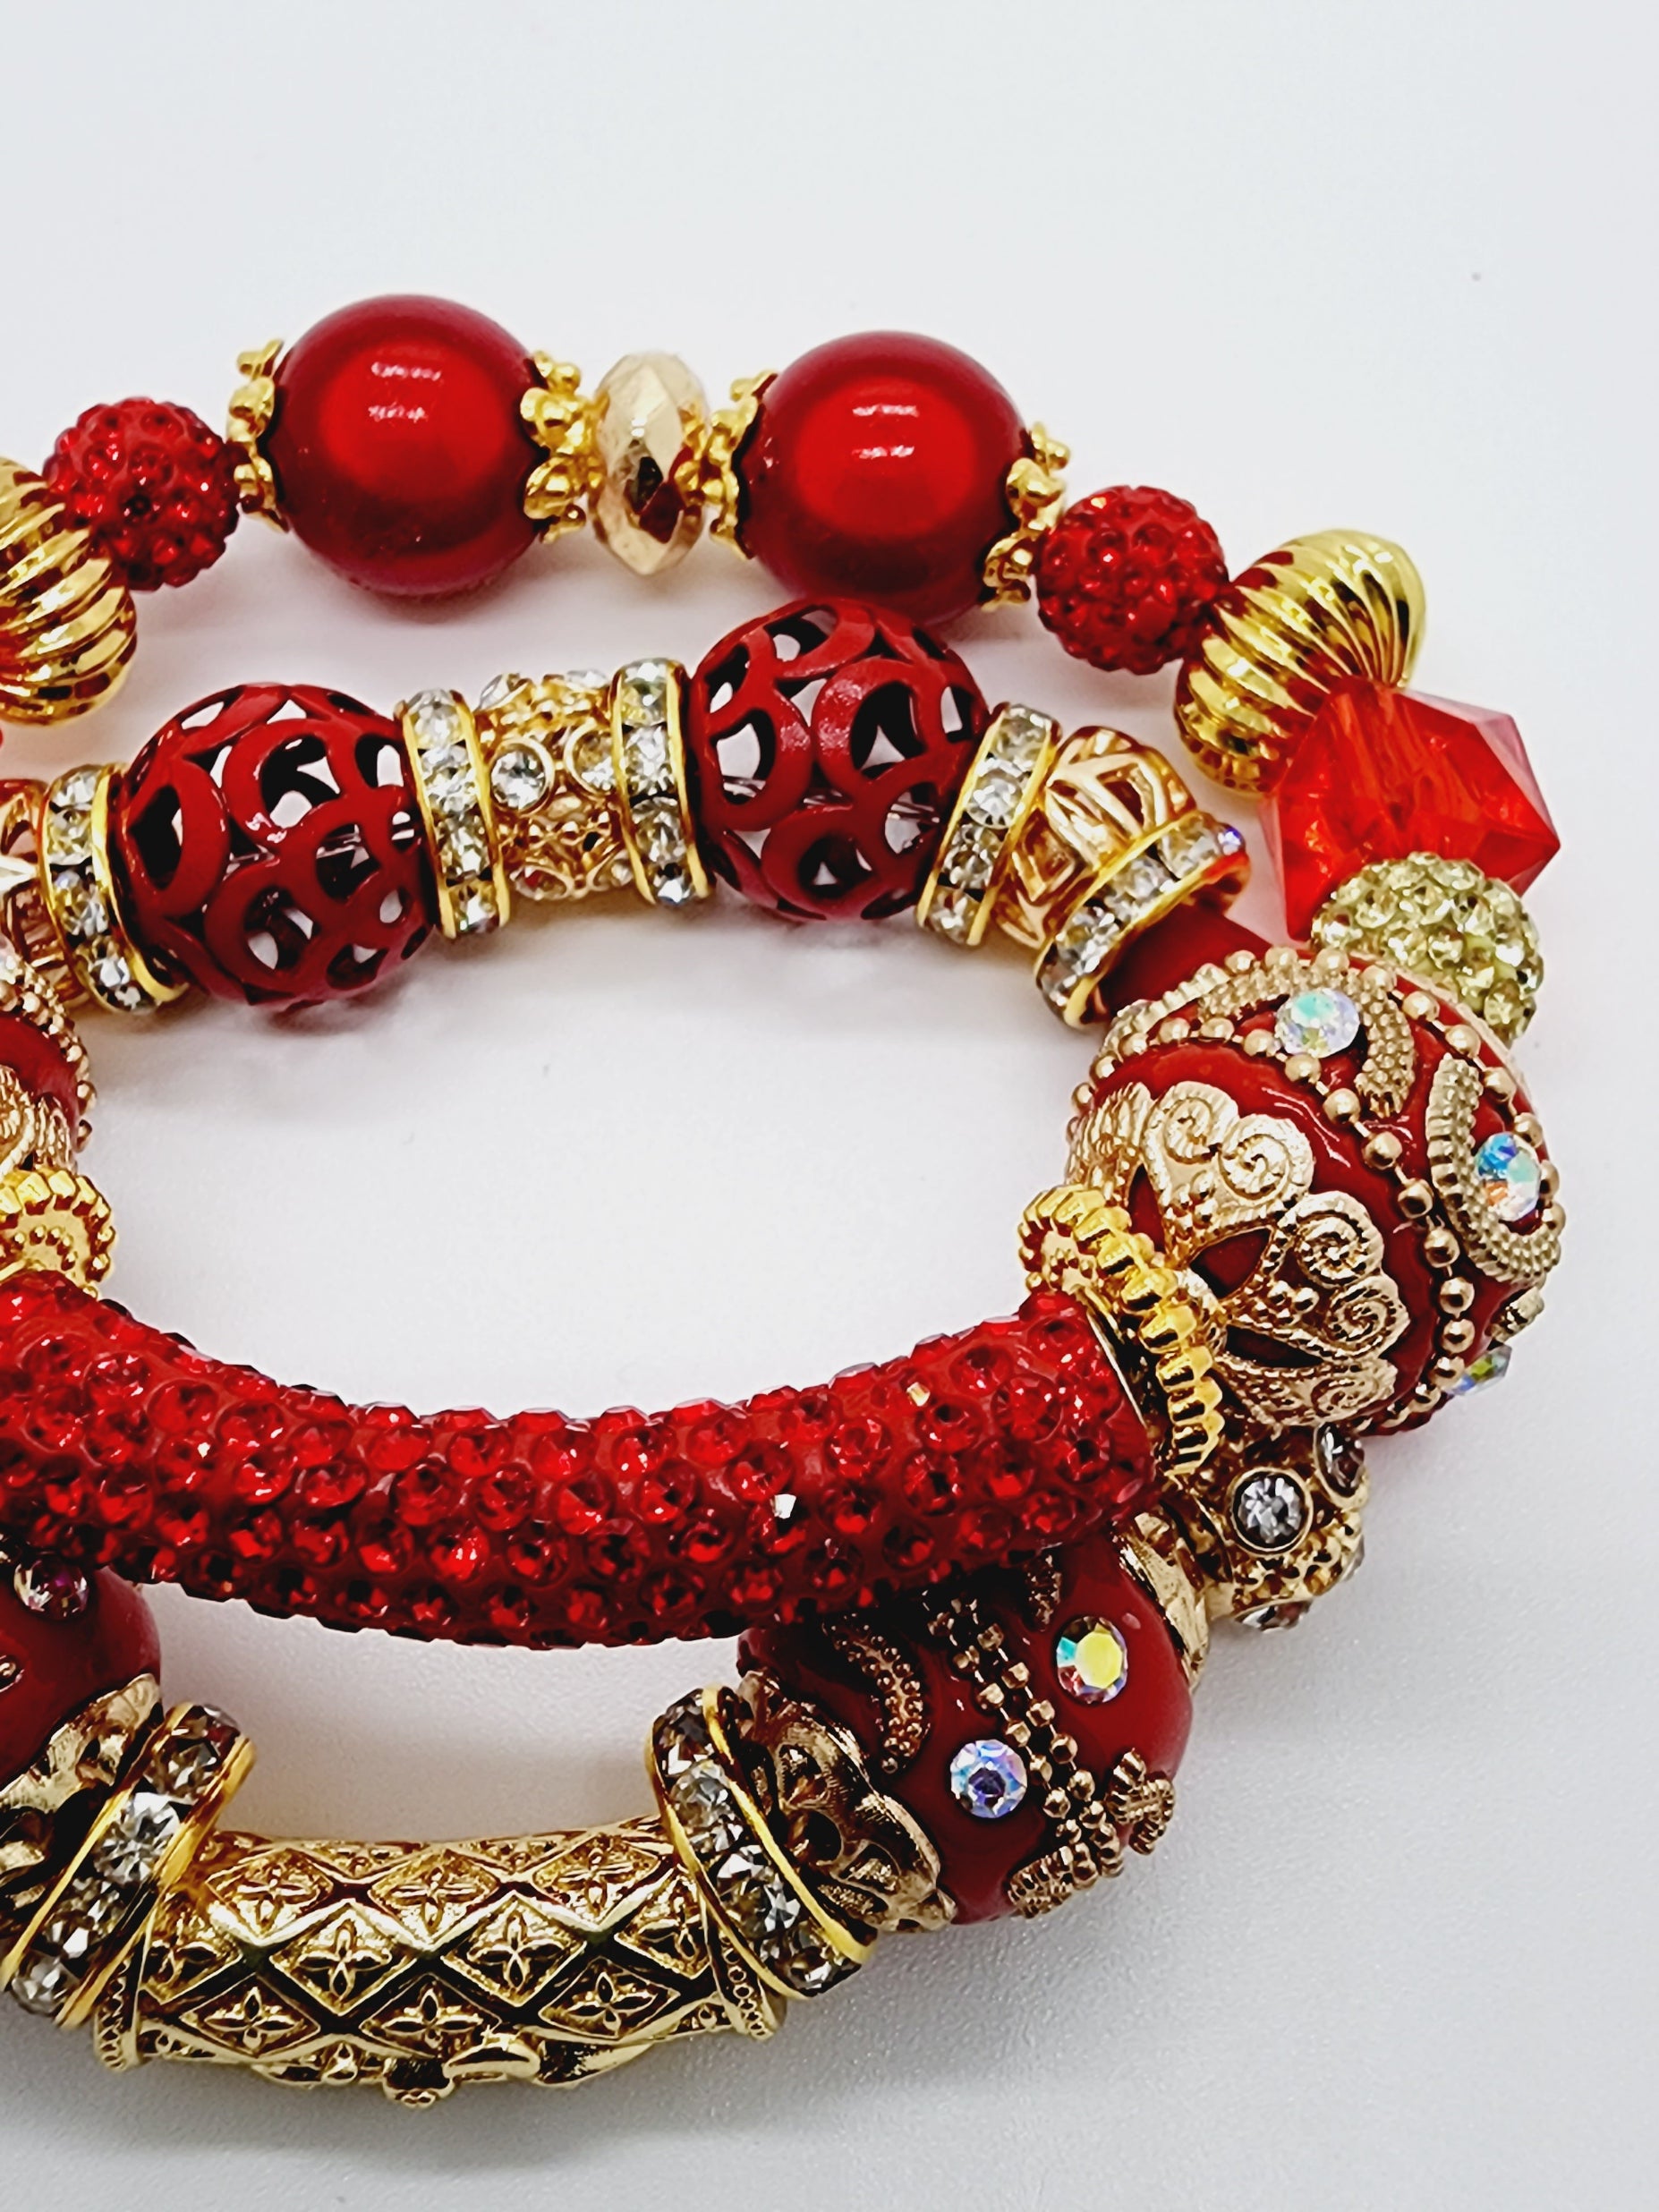 Length: 7.75 inches | Weight: 2.7 ounces  Distinctly You! This bracelet set is handmade using red and gold and ornate bead mix, gold rhinestone rondelle spacers, and bracelet uses 8mm latex free clear stretch cord. 